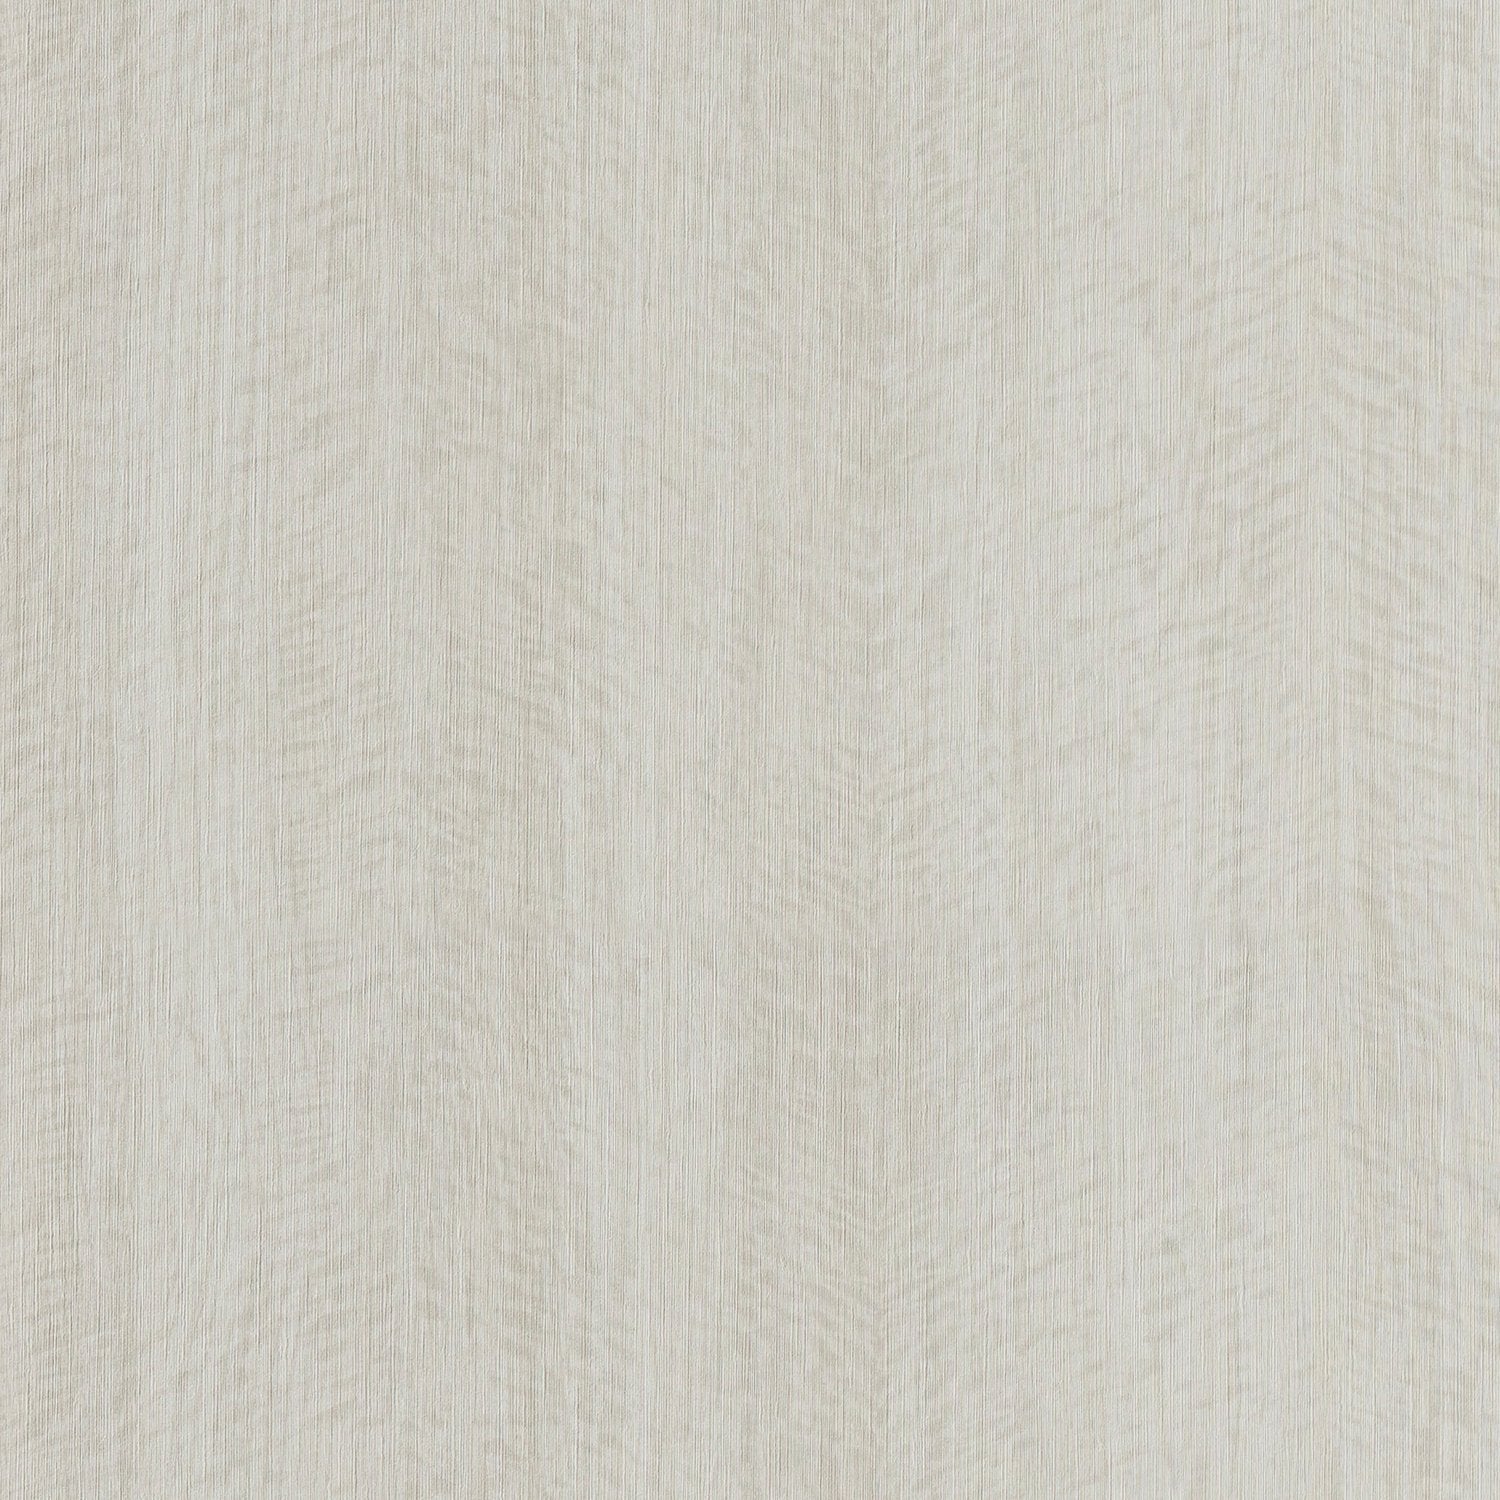 Woodn't It Be Nice - Y47874 - Wallcovering - Vycon - Kube Contract